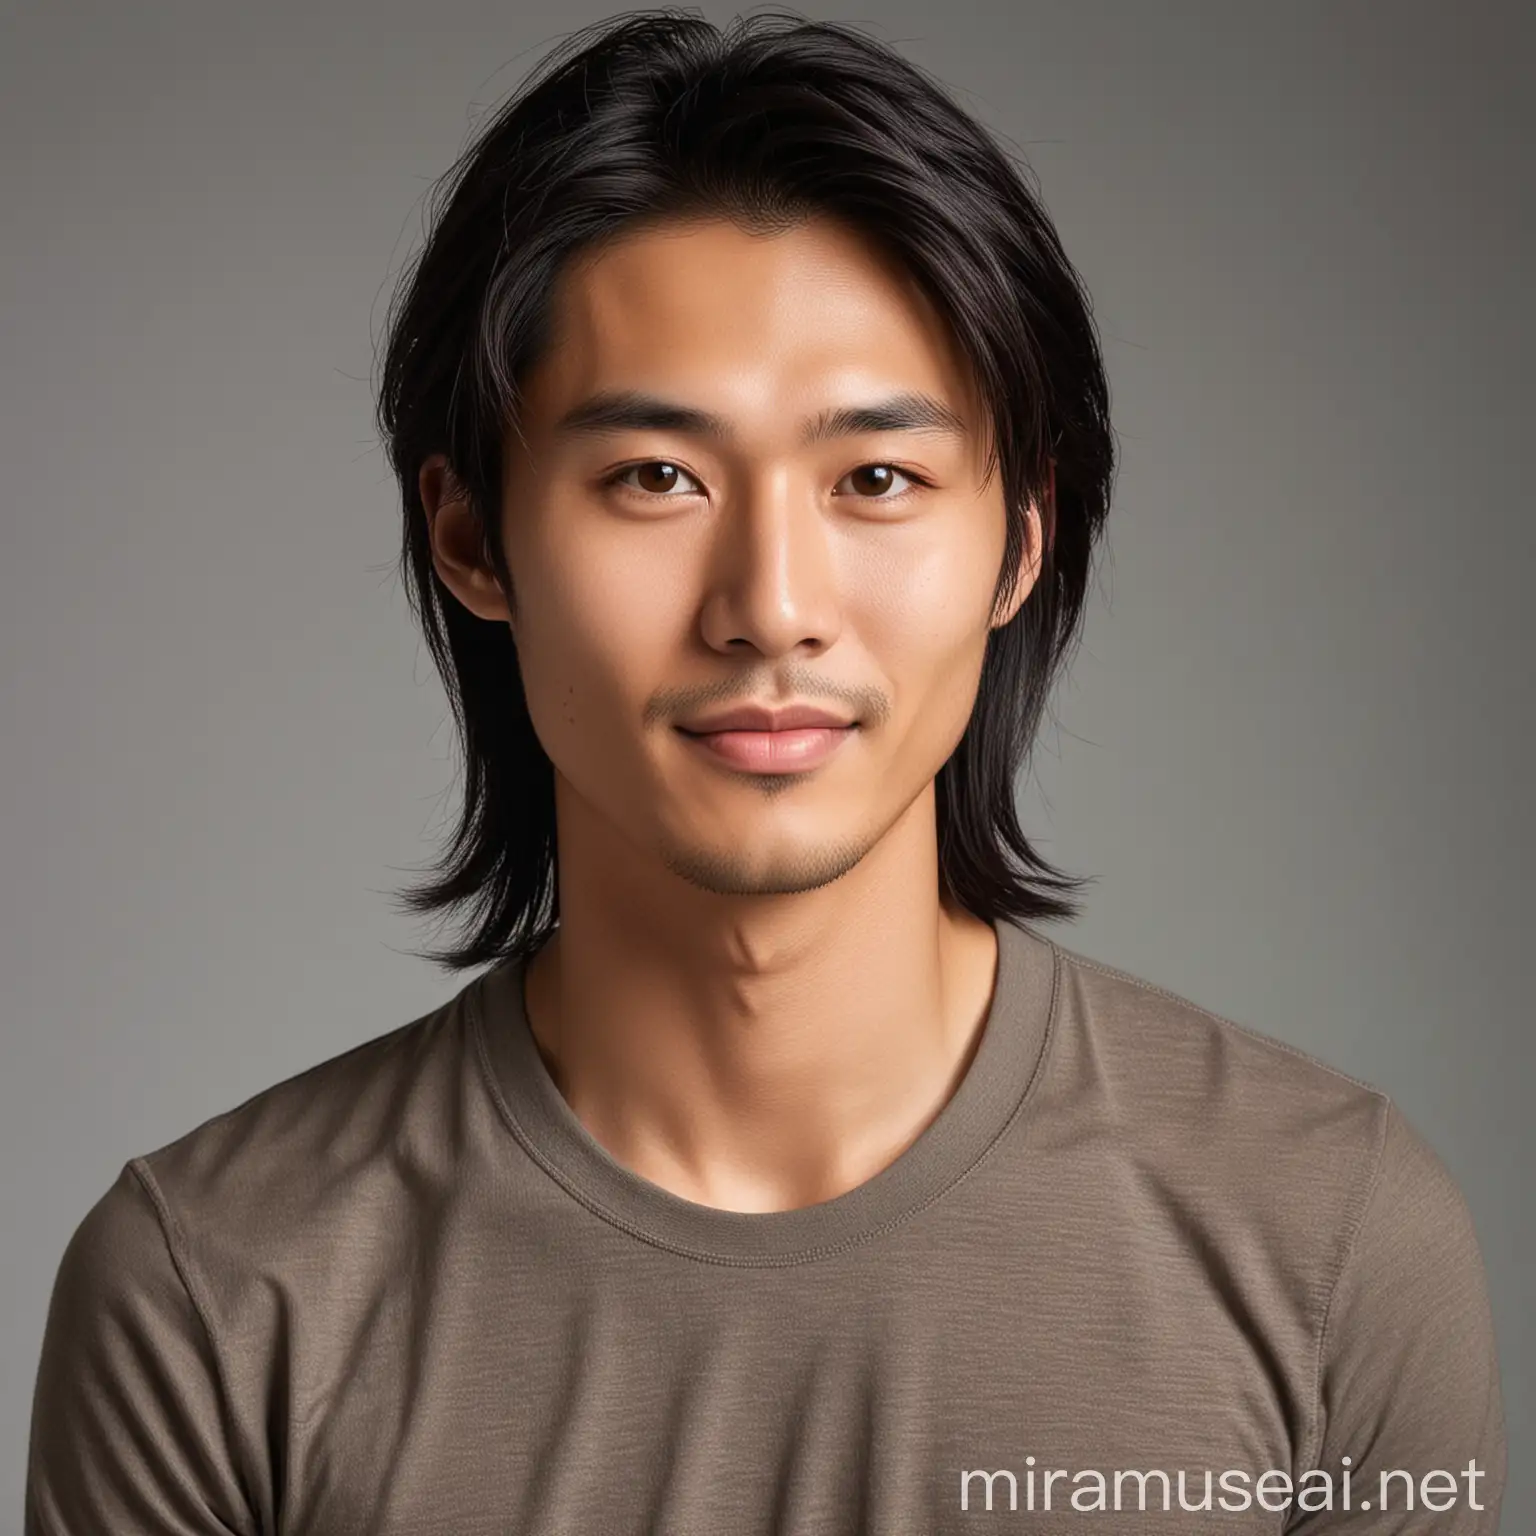 Asian Male Portrait with Long Black Hair and Gentle Smile in Studio Lighting